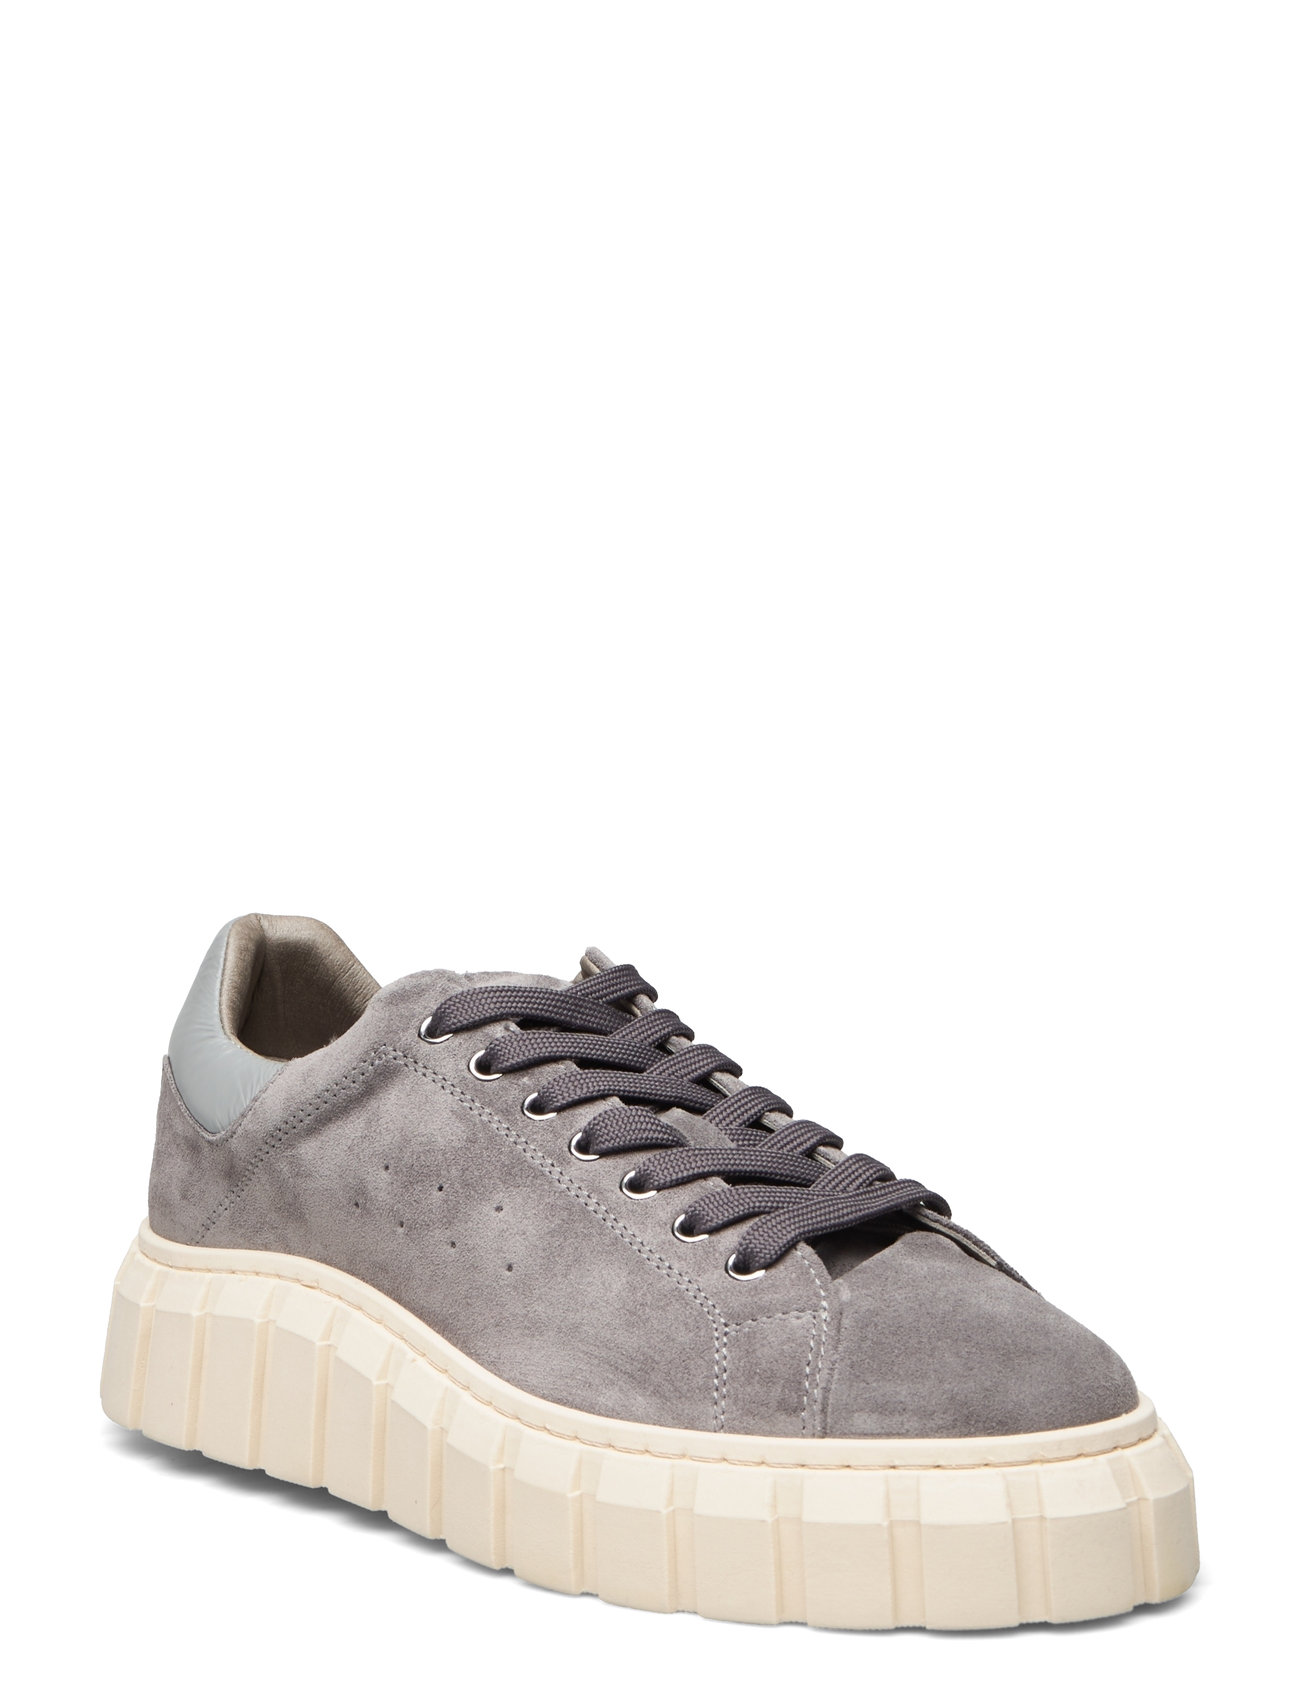 Balo Sneaker - Grey Suede Shoes Sneakers Chunky Sneakers Grey Garment Project